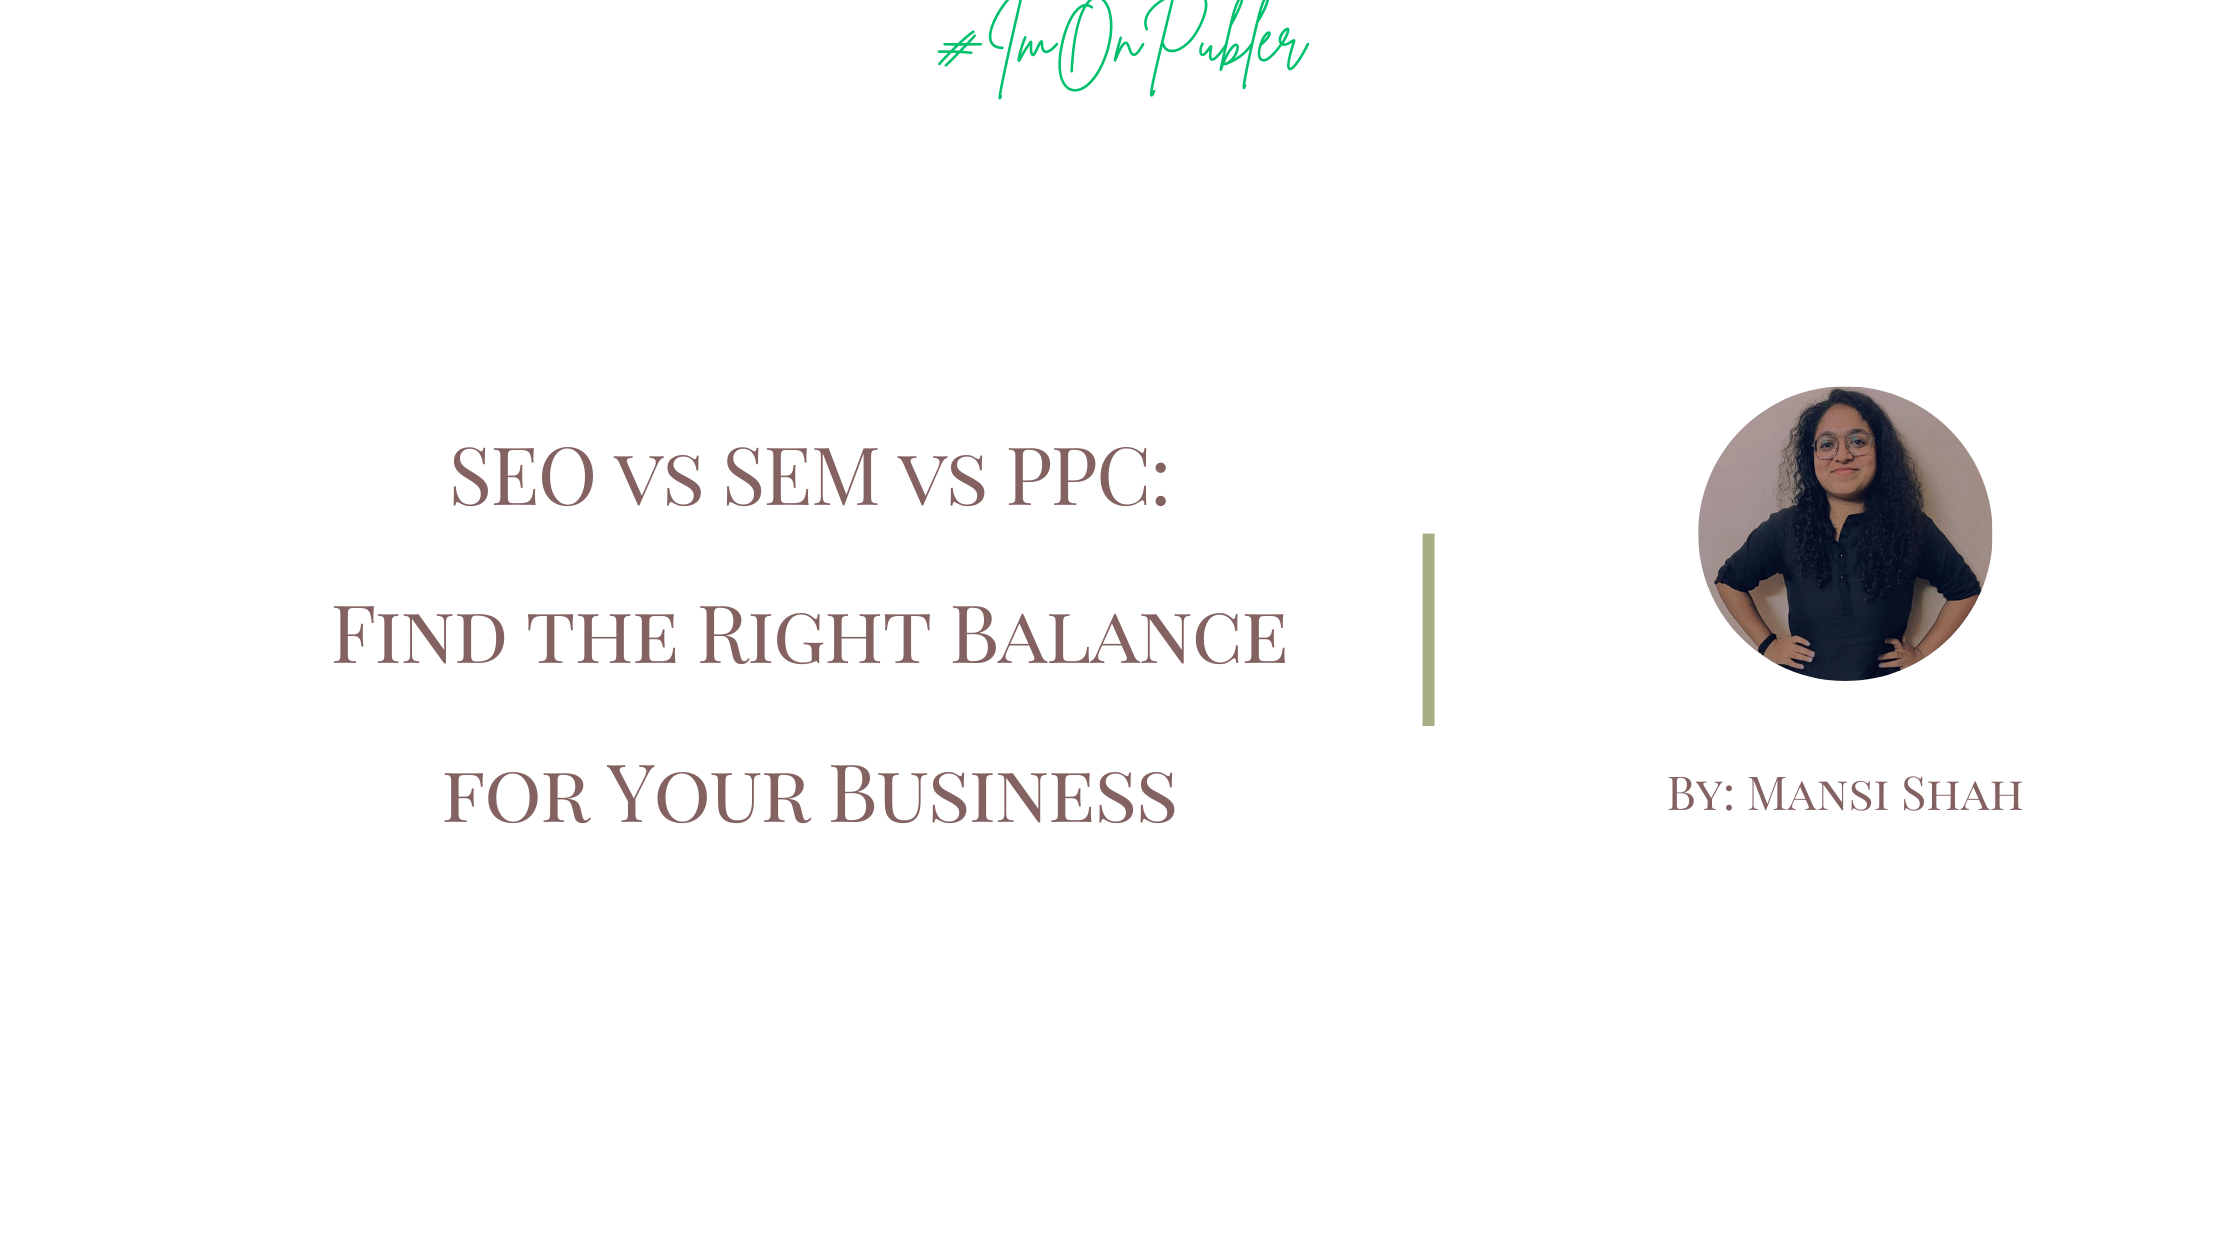 SEO vs SEM vs PPC: Find the Right Balance for Your Business